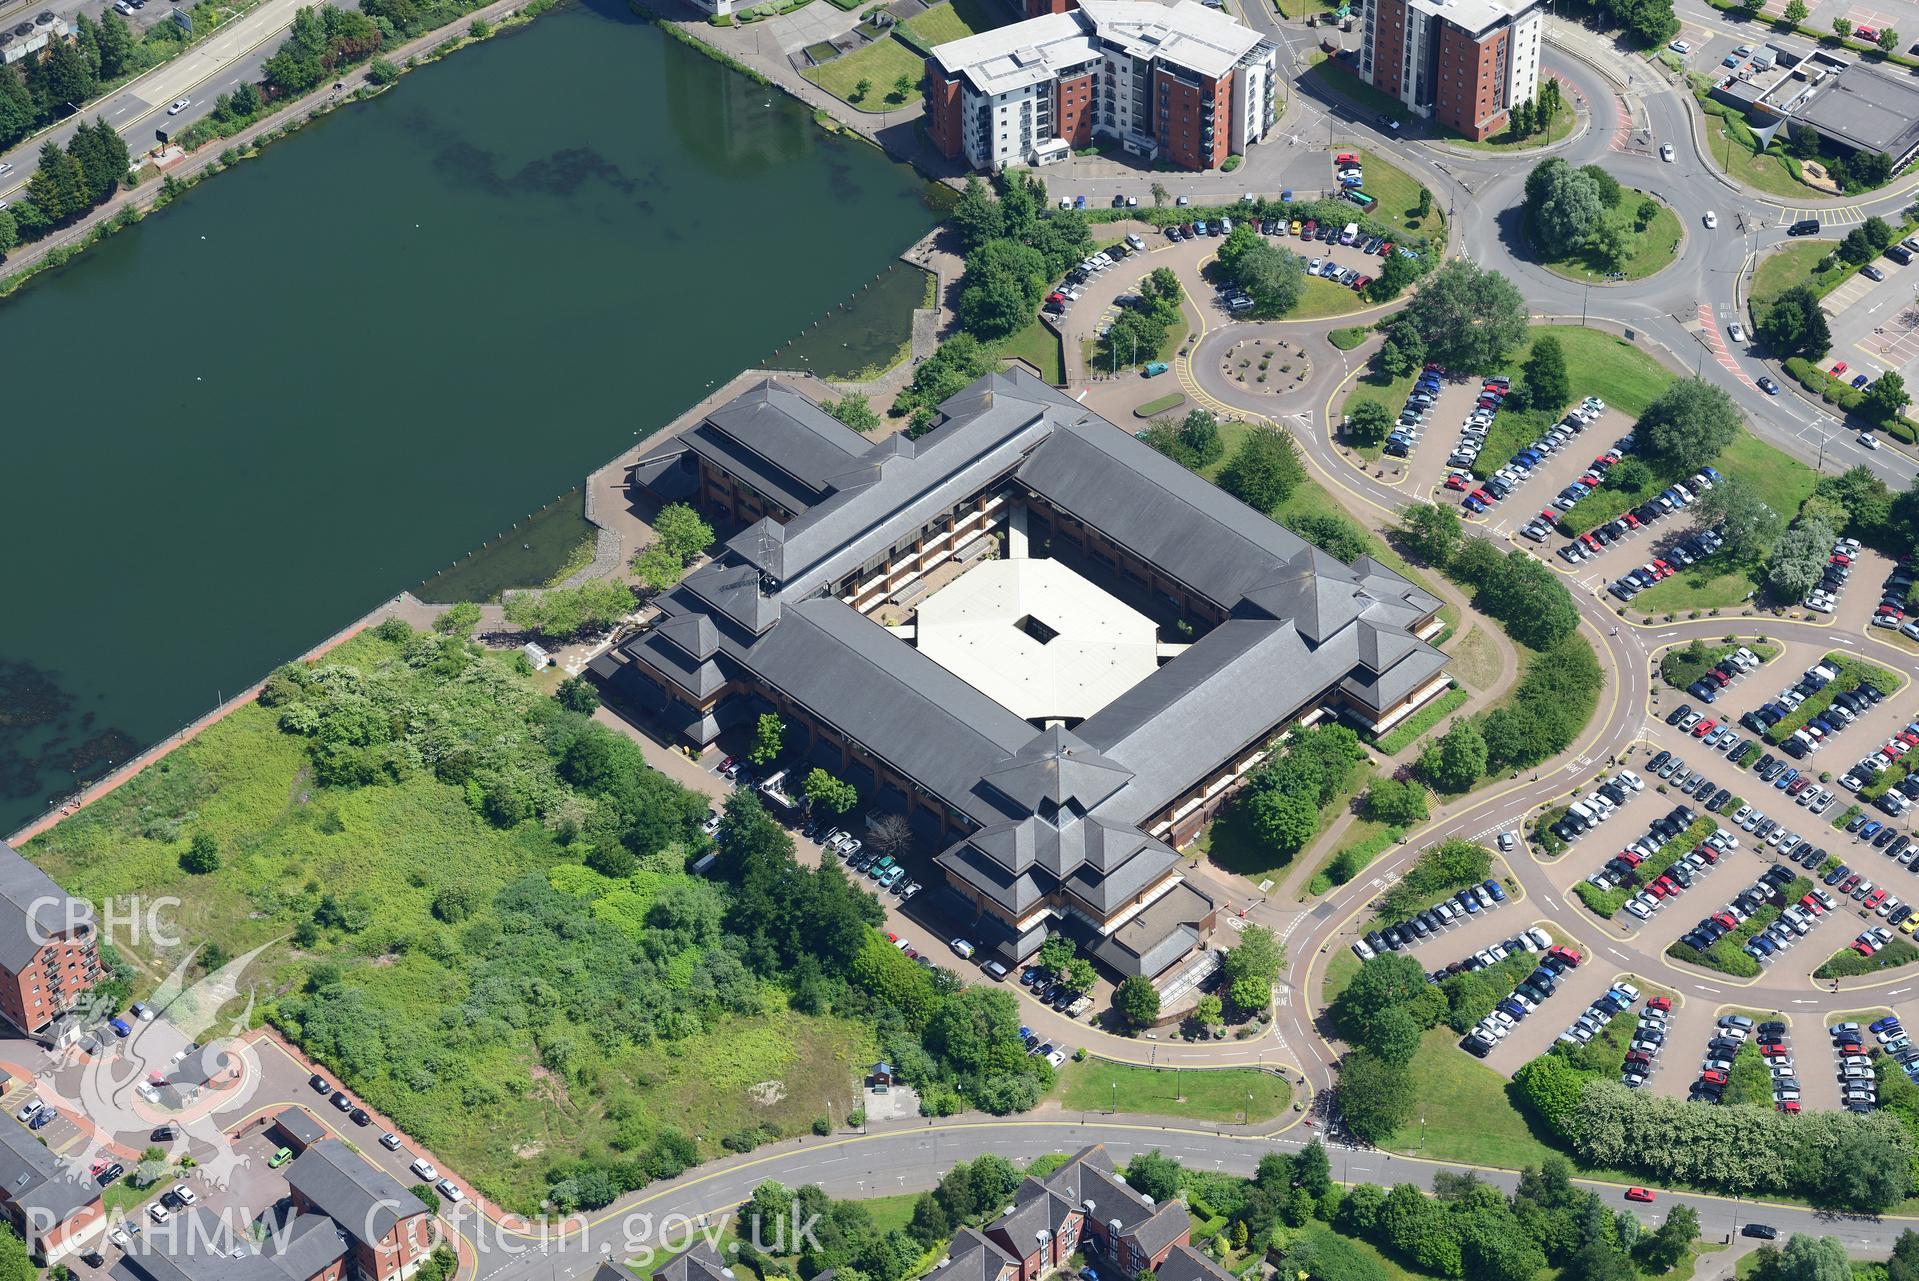 South Glamorgan County Hall, overlooking Bute East Dock, Cardiff Bay. Oblique aerial photograph taken during the Royal Commission's programme of archaeological aerial reconnaissance by Toby Driver on 29th June 2015.